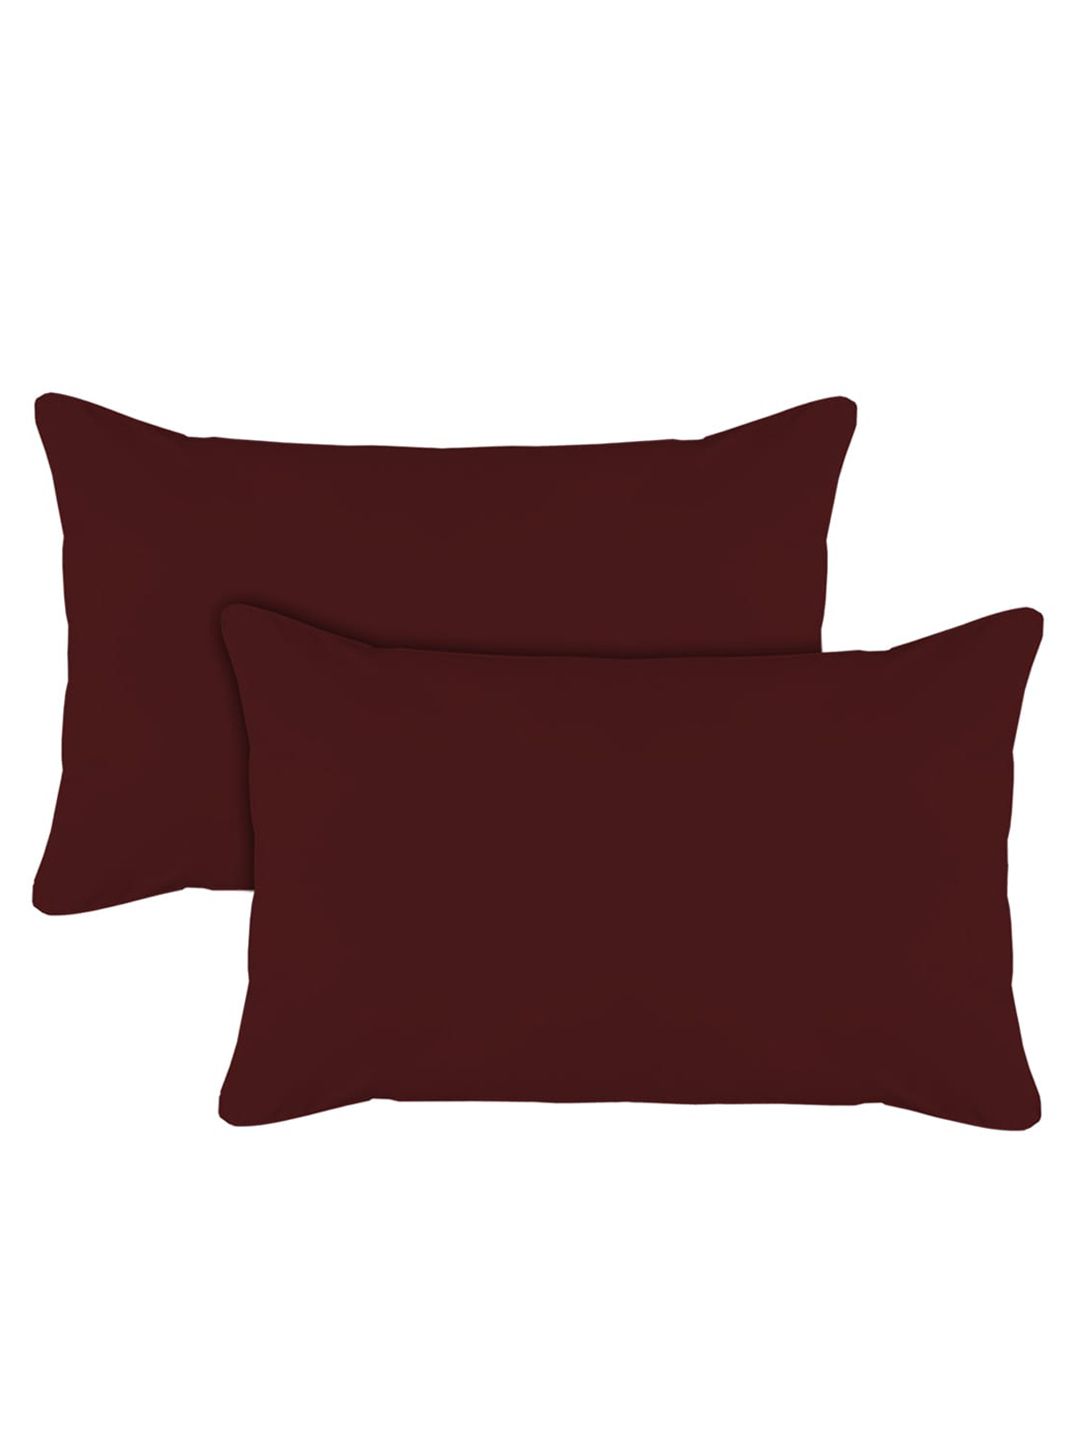 Kuber Industries Set Of 2 Solid Brown Pillows Price in India